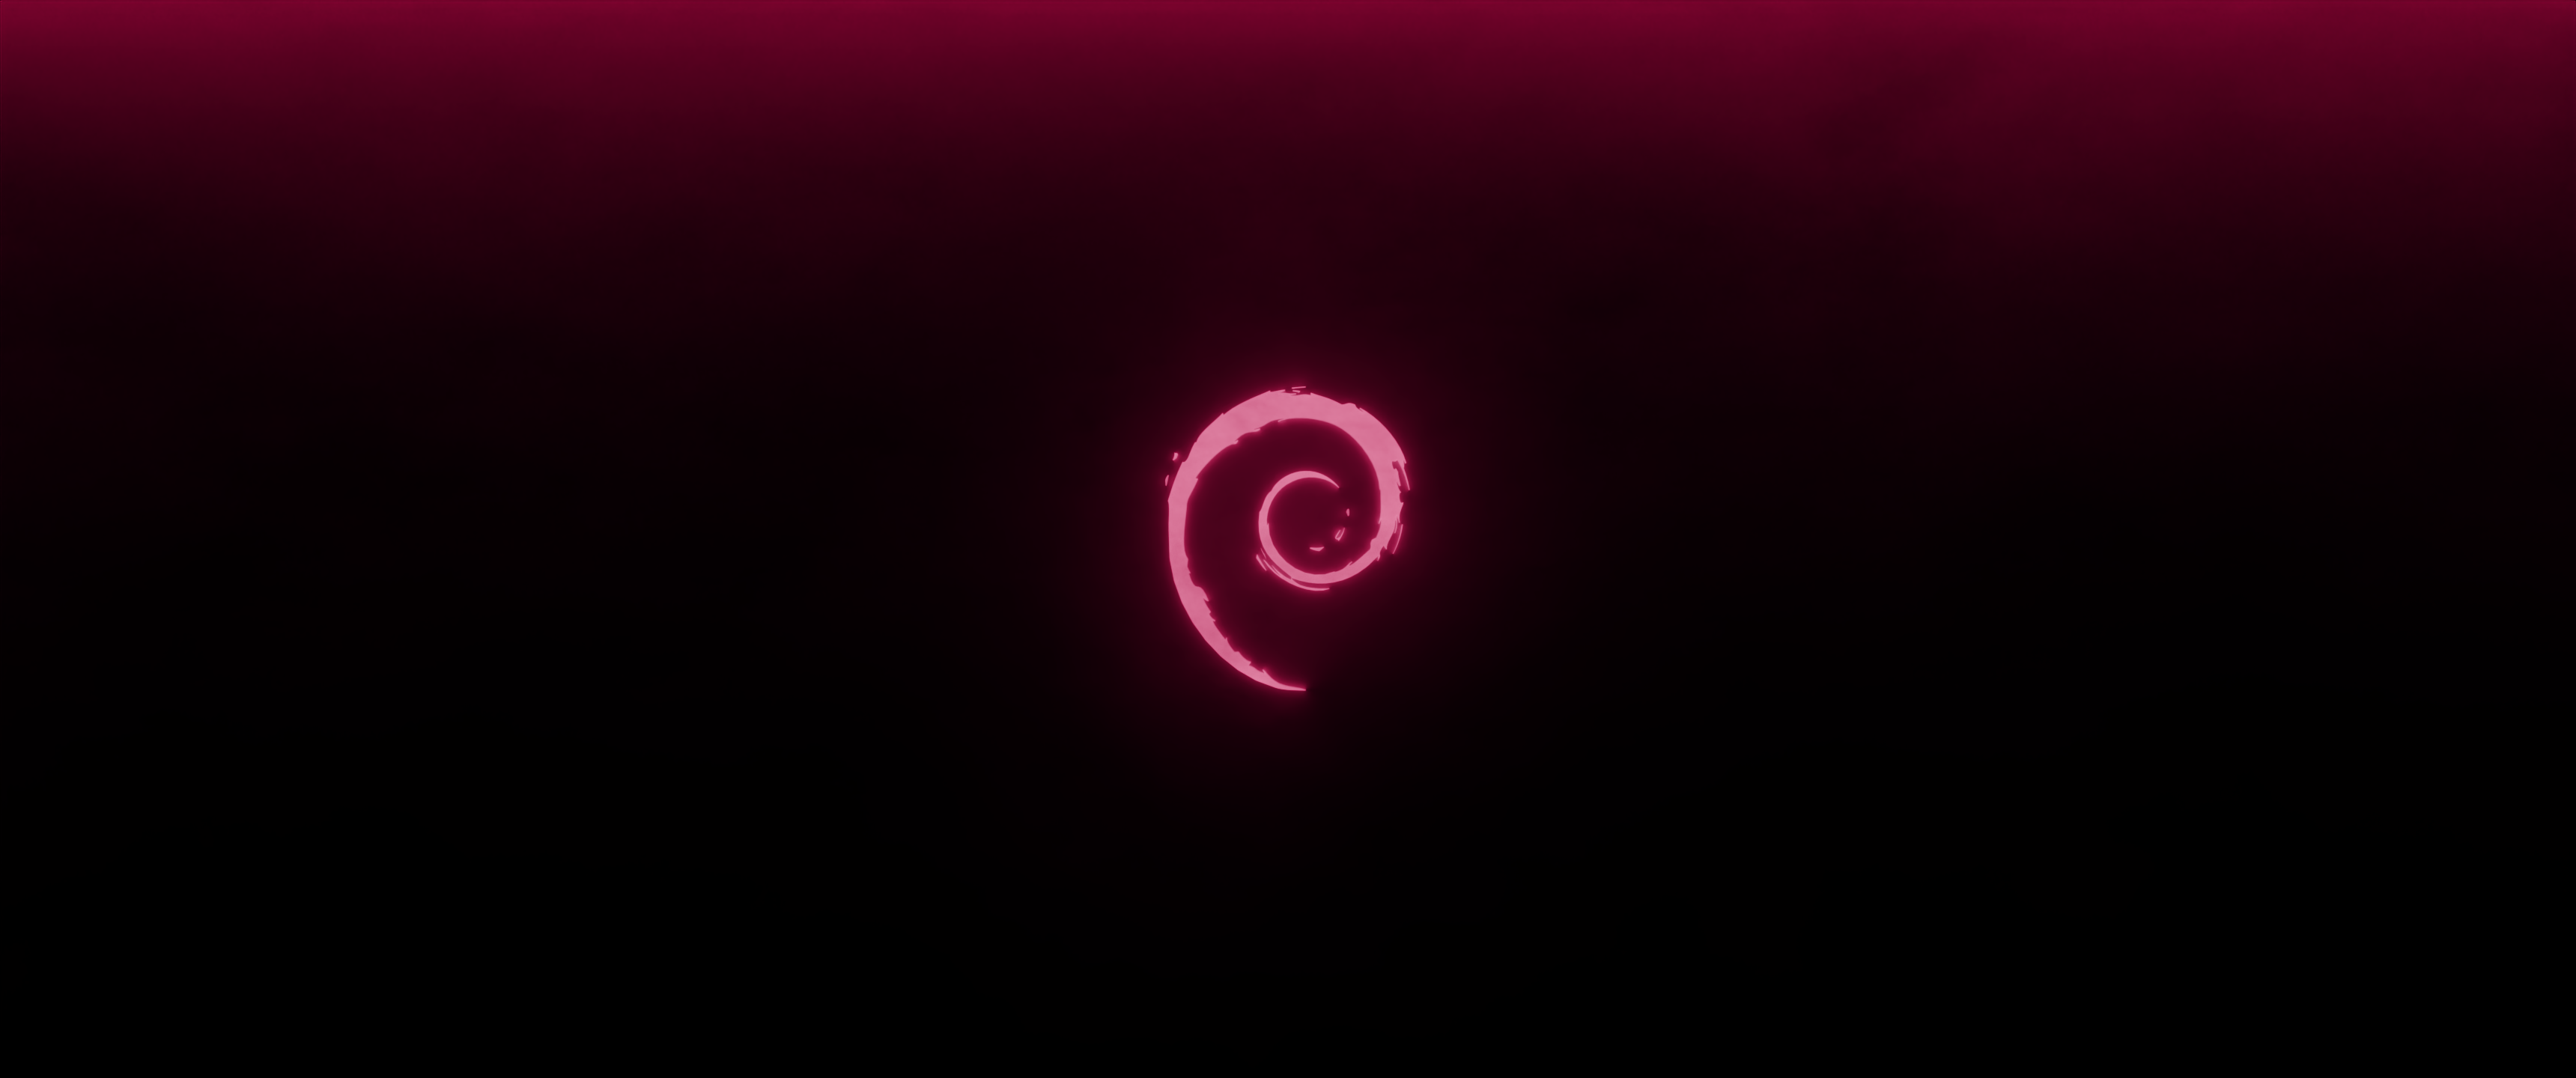 Linux Operating System Debian Bass Clef 3440x1440